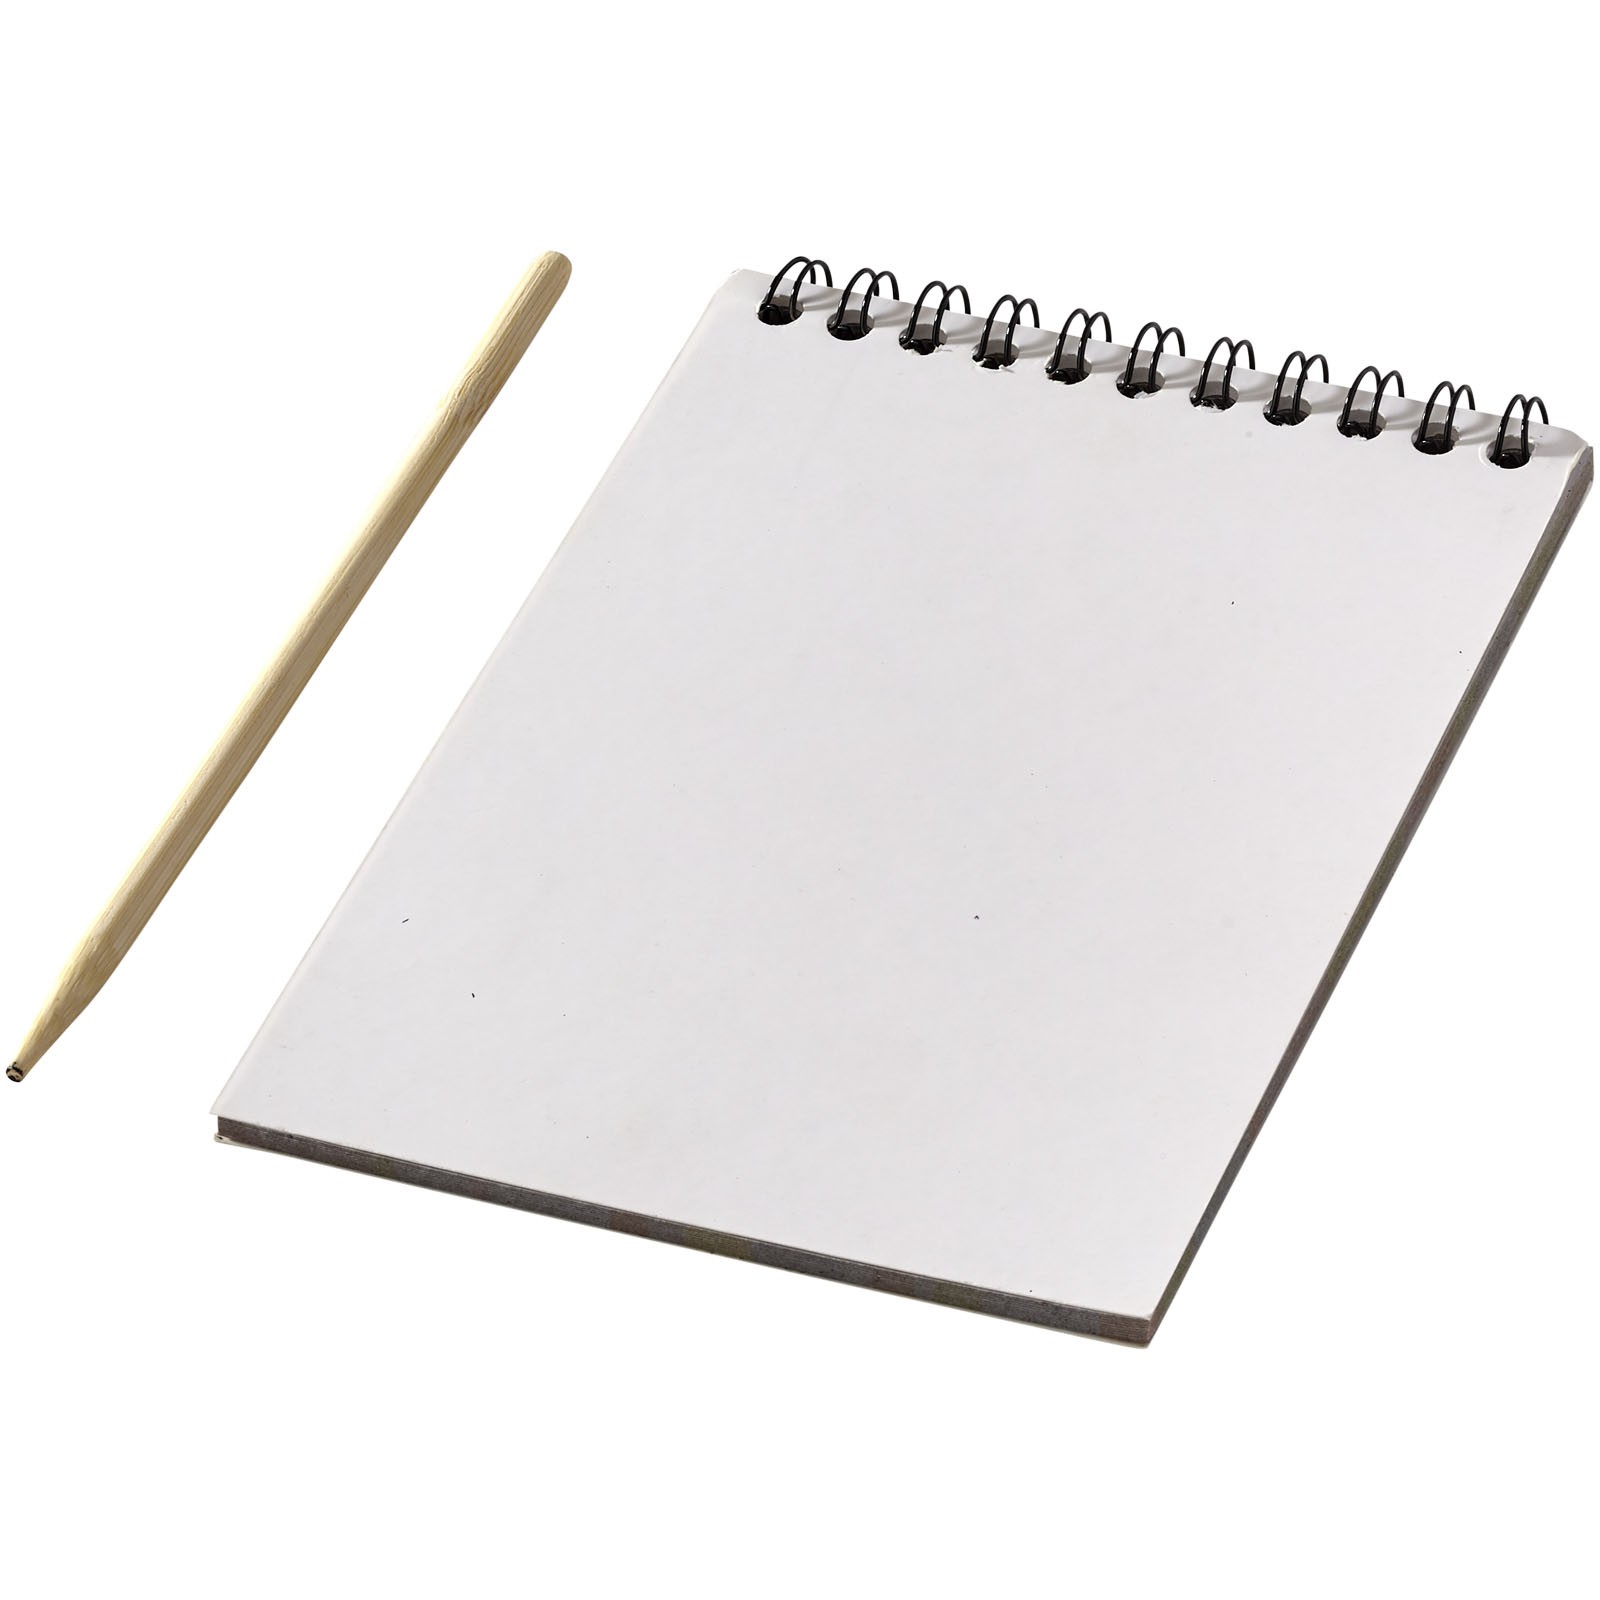 waynon-colourful-scratch-pad-with-scratch-pen-white-10705500-hd